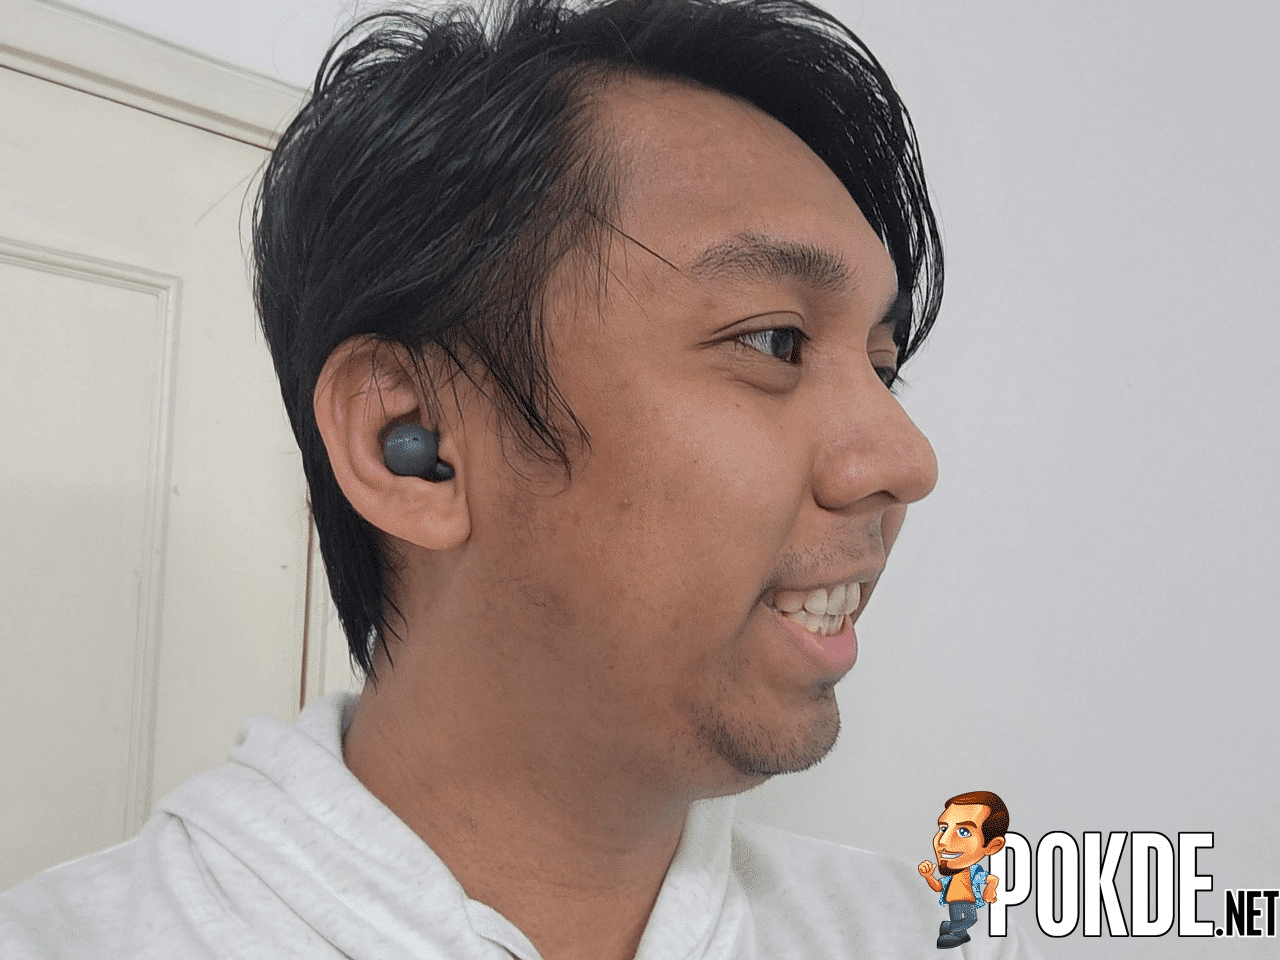 Sony LinkBuds WF-L900 Review - Great Idea, Needs Improvements